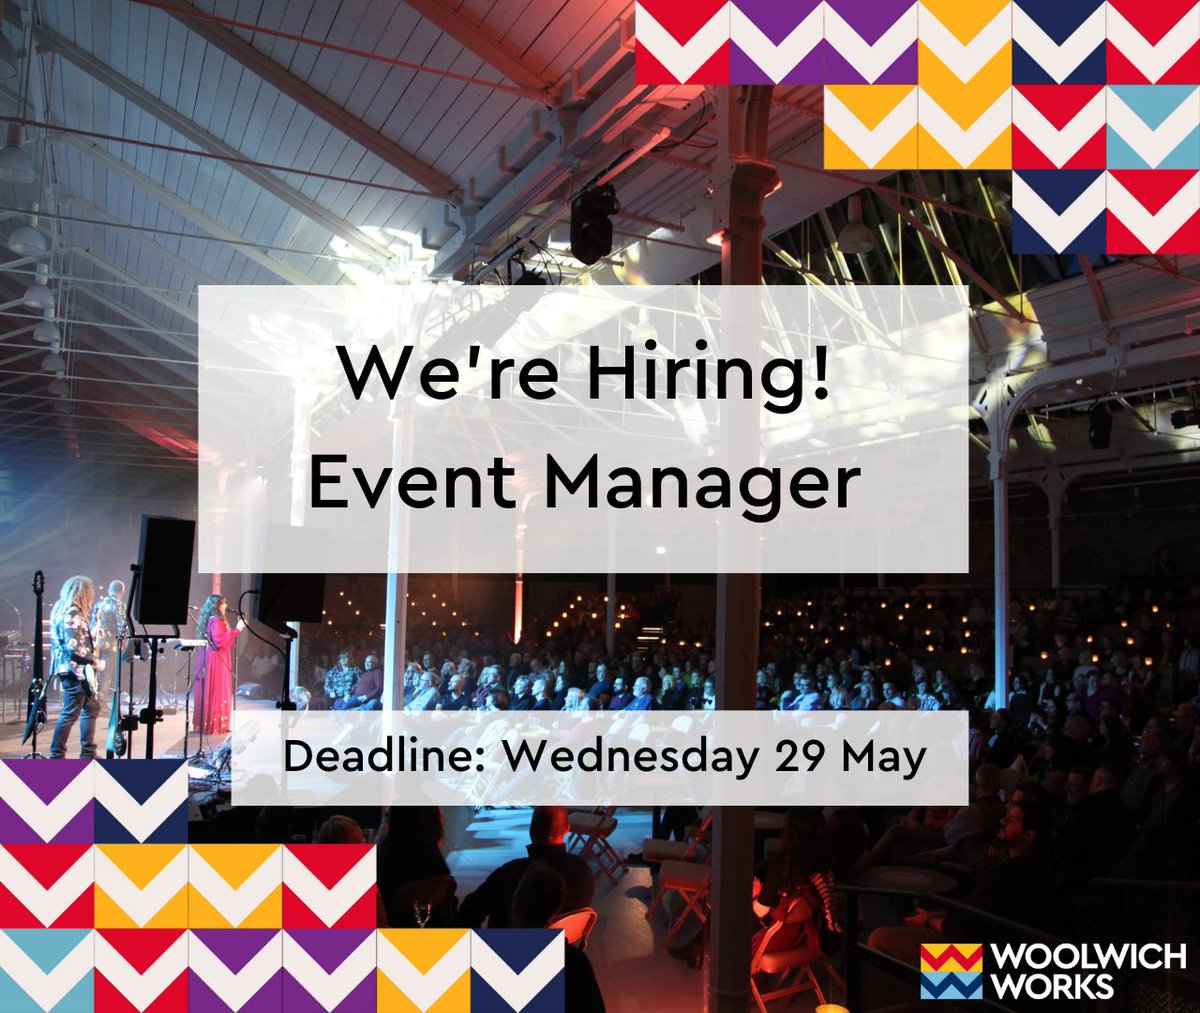 📢 We're searching for an Event Manager to join the Woolwich Works team! Find out more and apply now: woolwich.works/jobs/event-man… Deadline: Wed 29 May